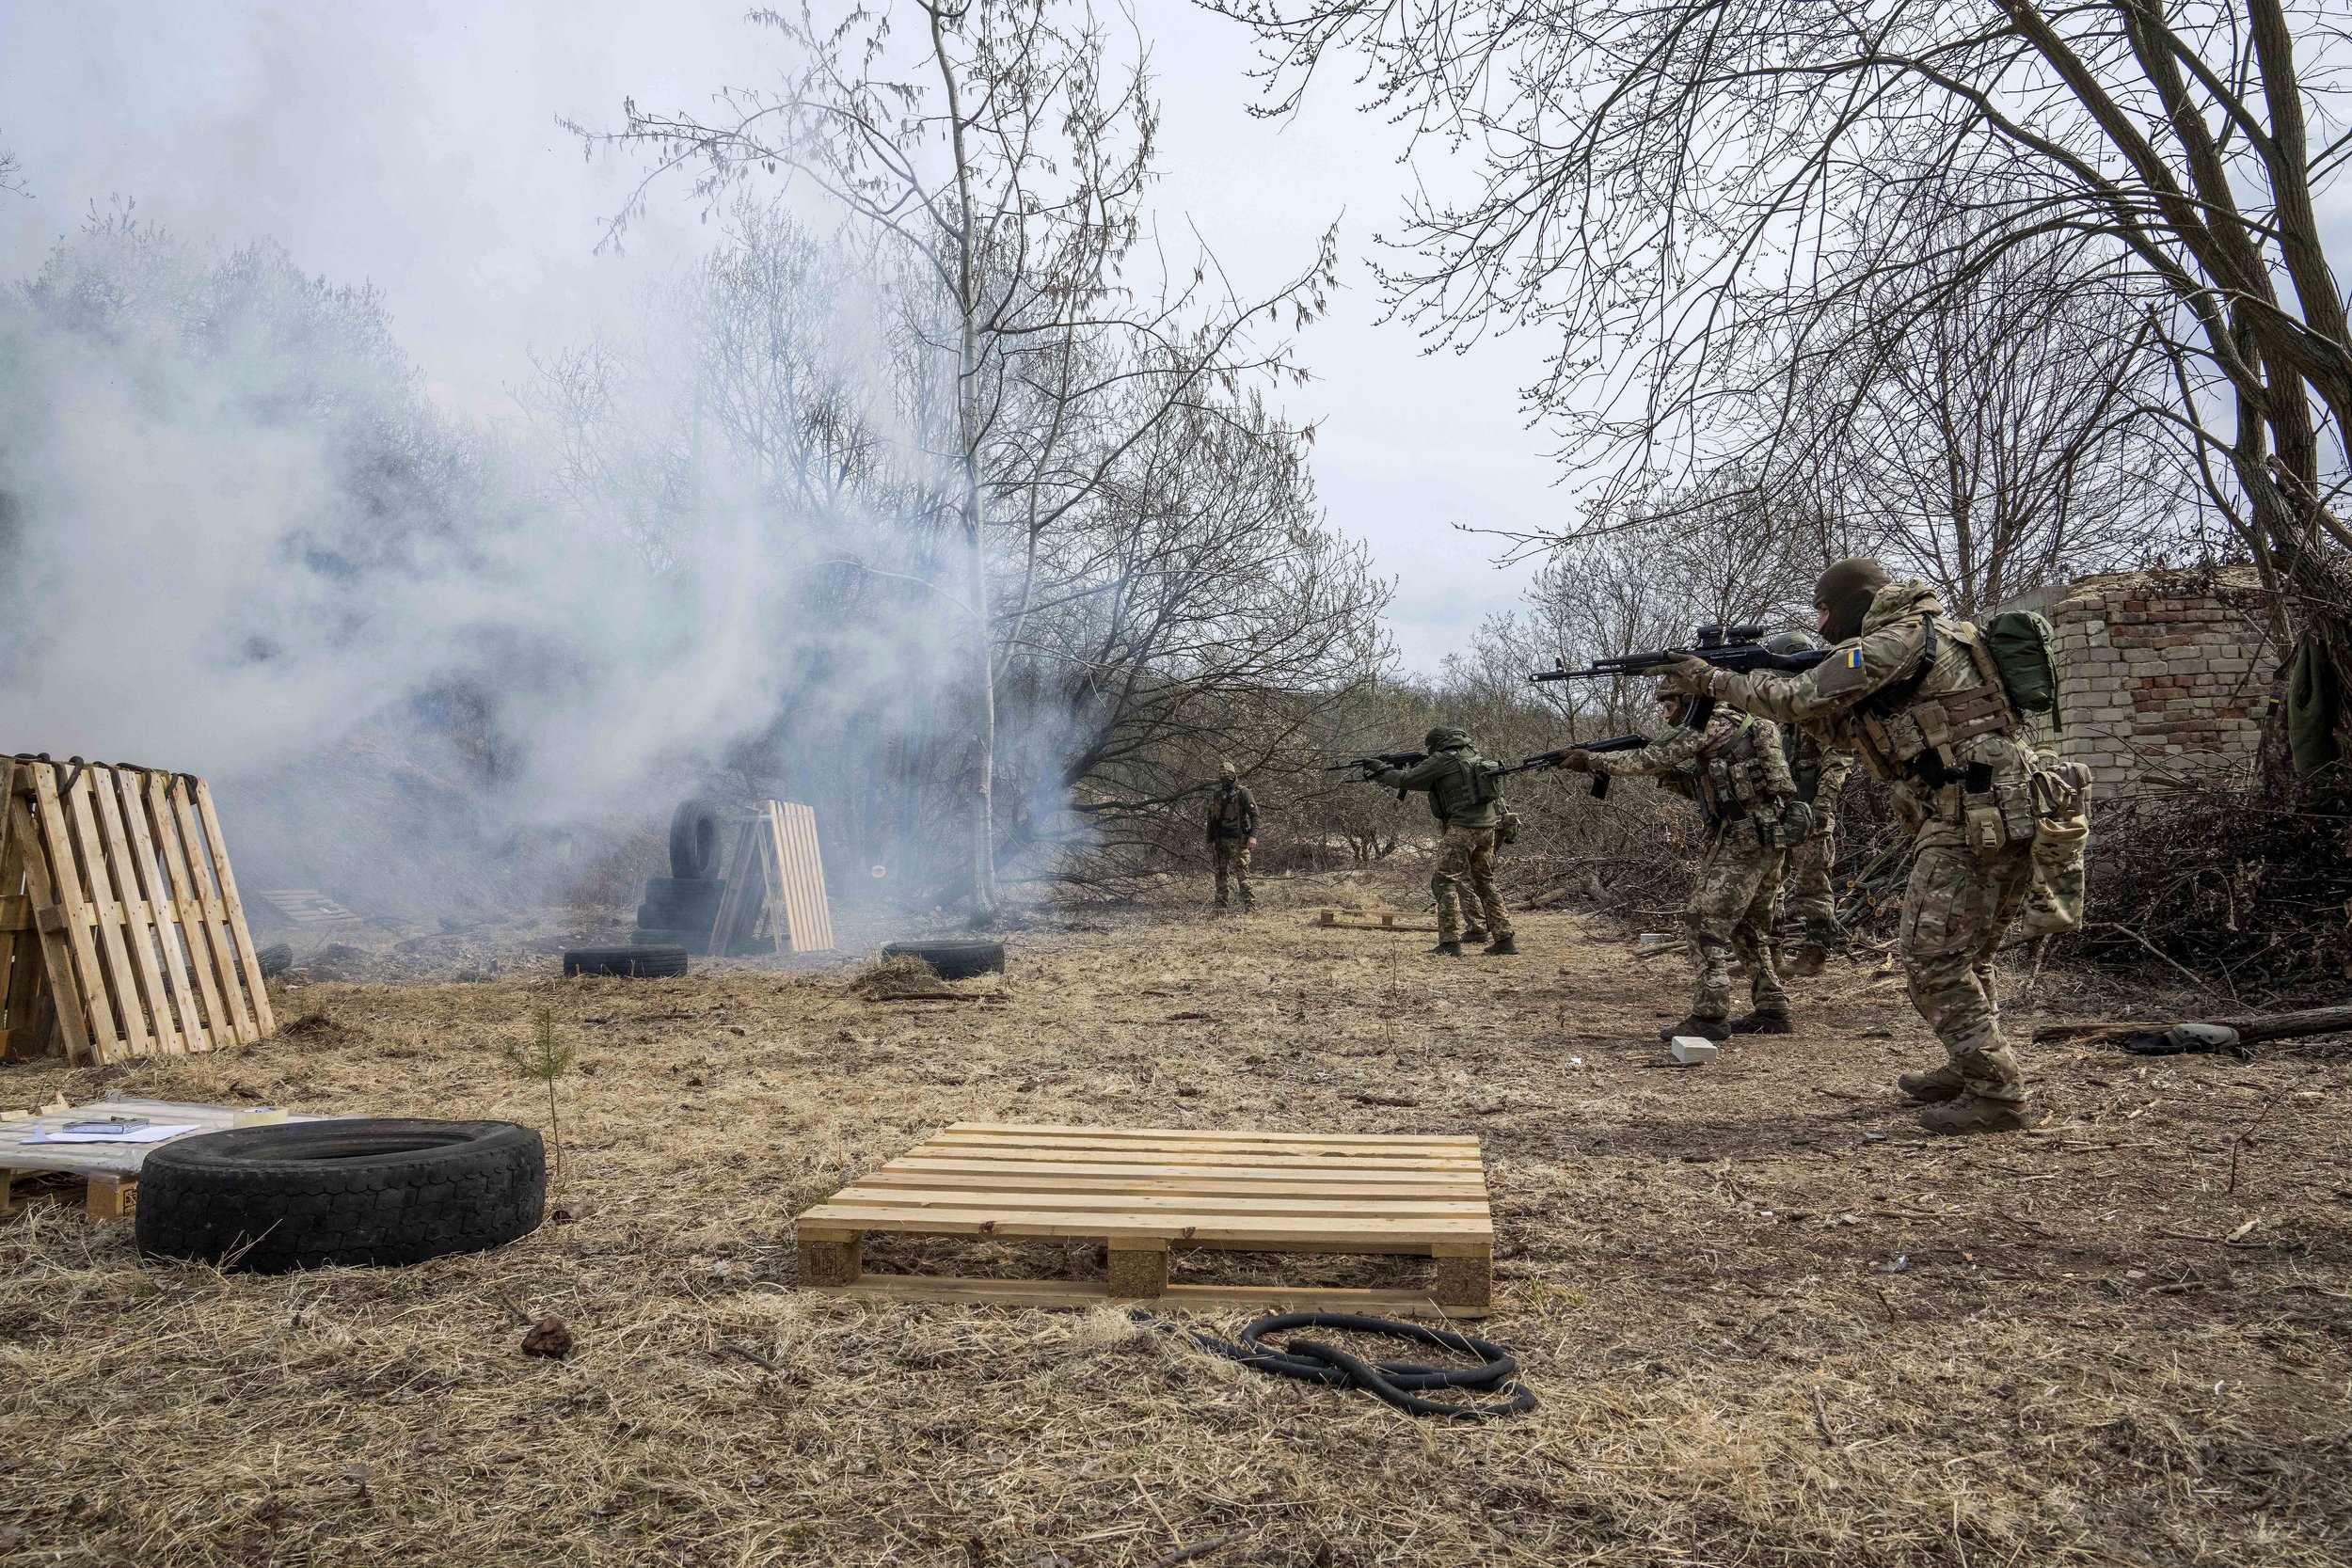  Ukrainian soldiers of the 103rd Separate Brigade of the Territorial Defense of the Armed Forces, fire their weapons, during a training exercise, at an undisclosed location, near Lviv, western Ukraine, Tuesday, March 29, 2022. (AP Photo/Nariman El-Mo